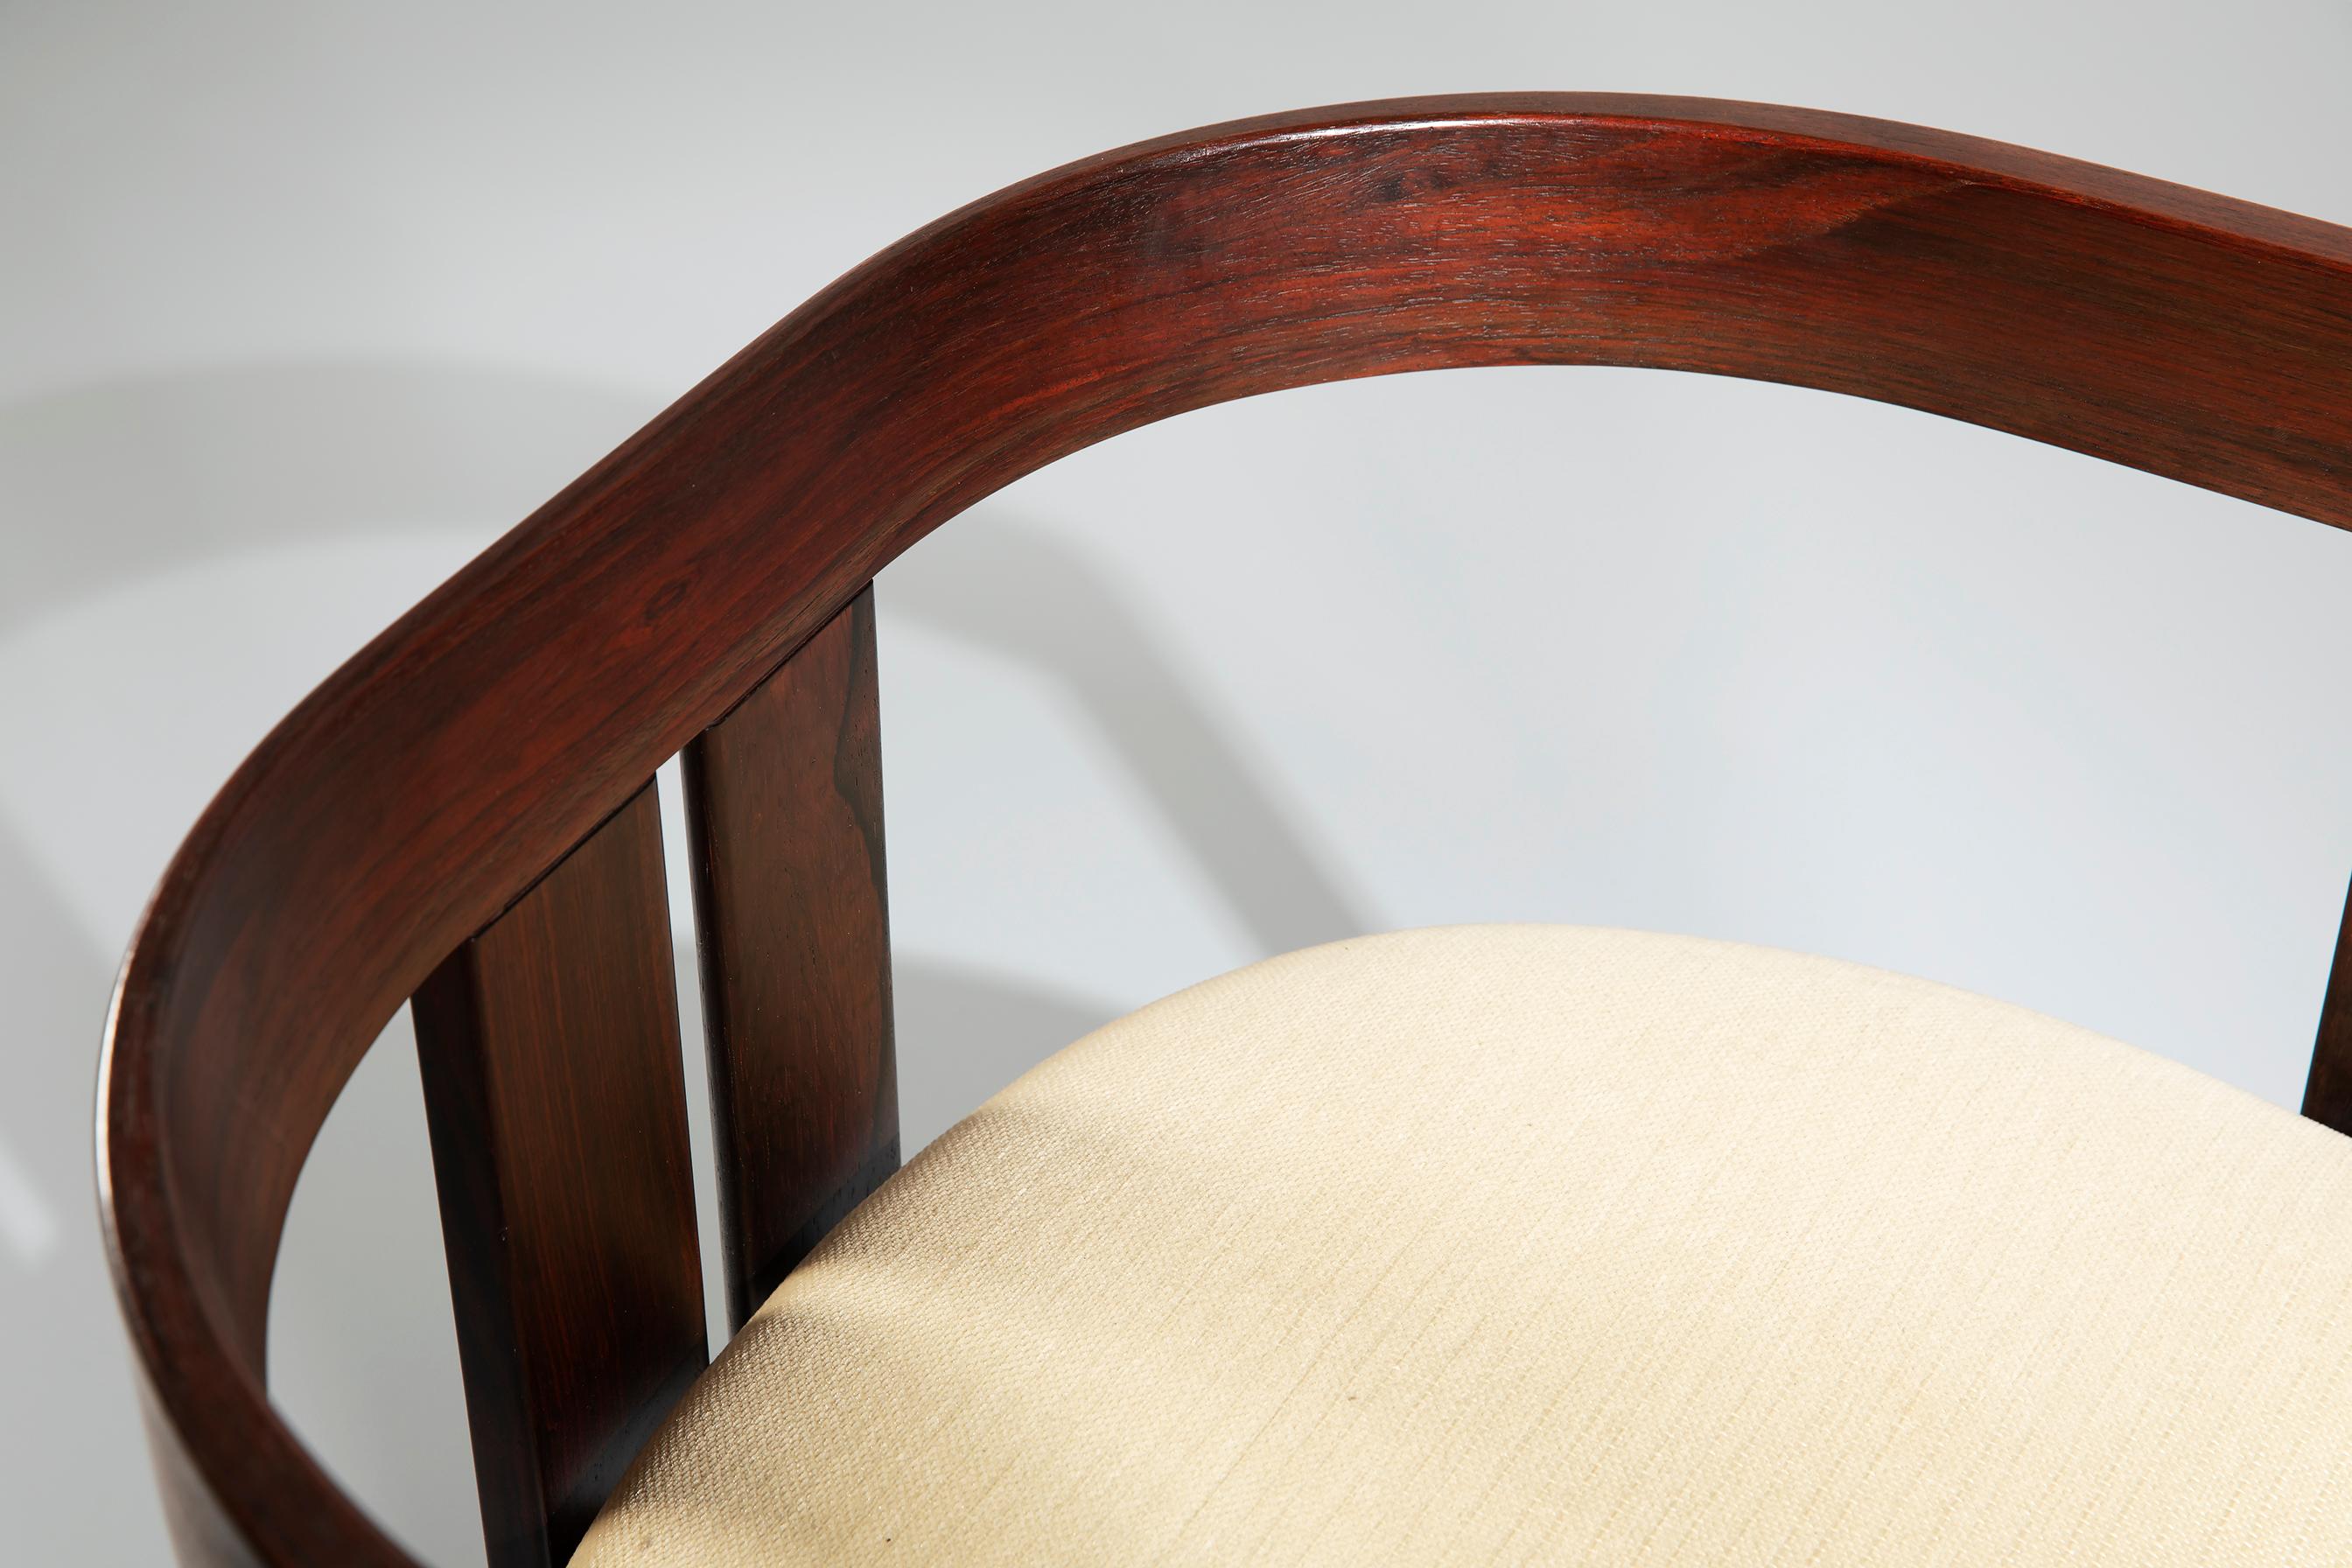 Tobia Scarpa 'Pigreco' Rosewood Armchair for Gavina, 1960s For Sale 1